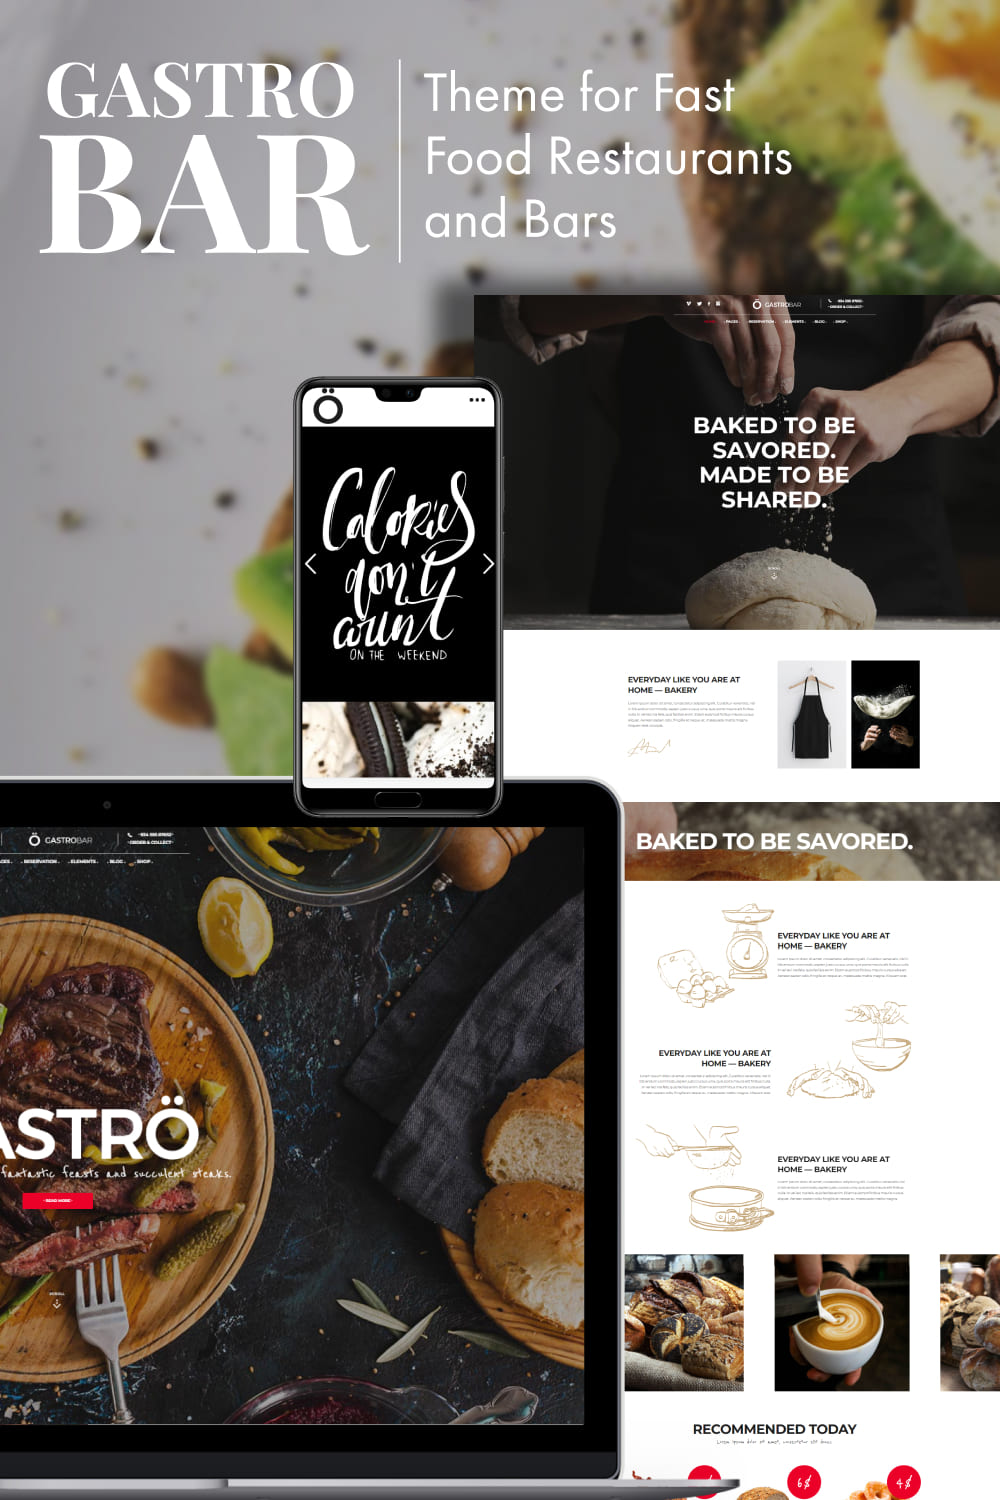 Preview GastroBar - Theme for Fast Food Restaurants and Bars on the mobile.